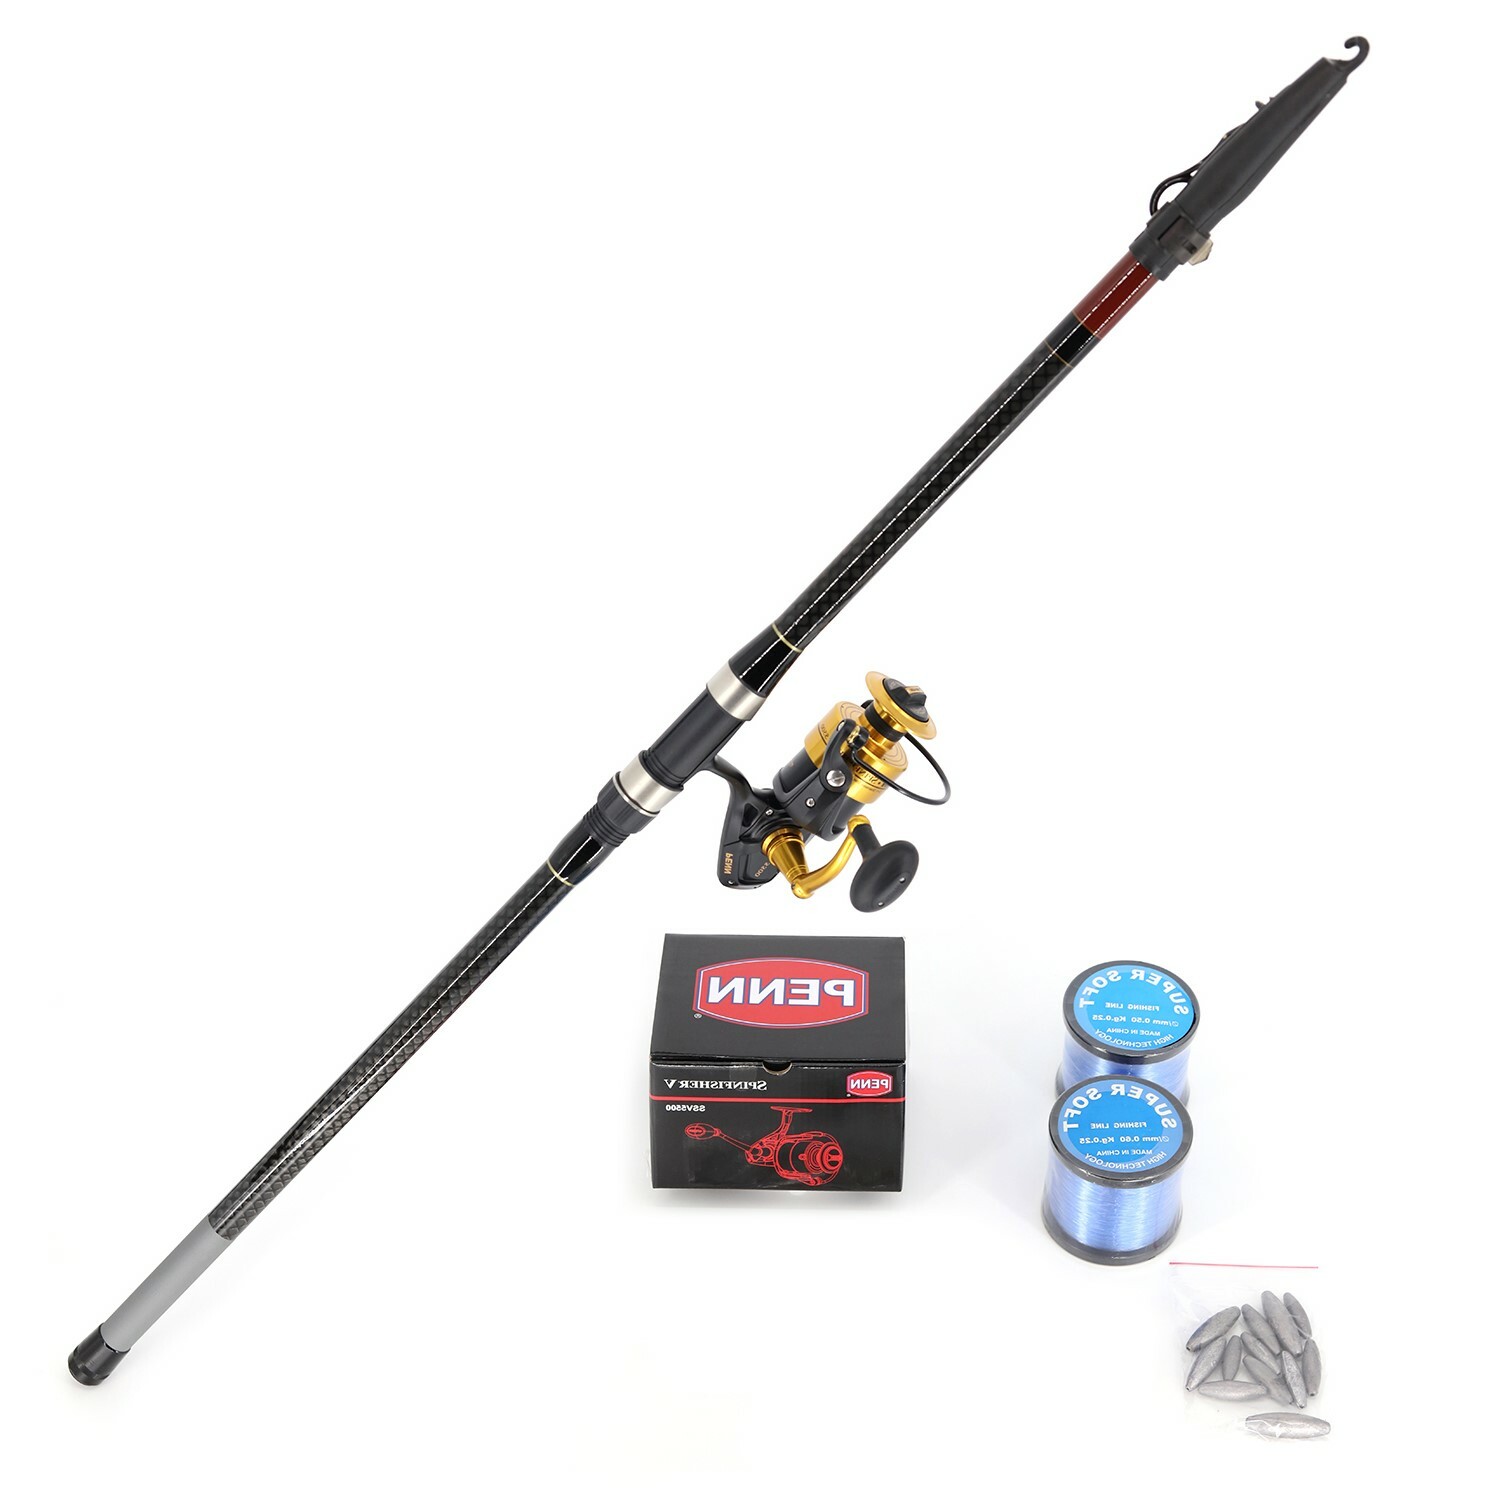 Shore Fishing (Pilot 4.2m and Penn V5500 including Nylon line with rigs and sinkers) Combo